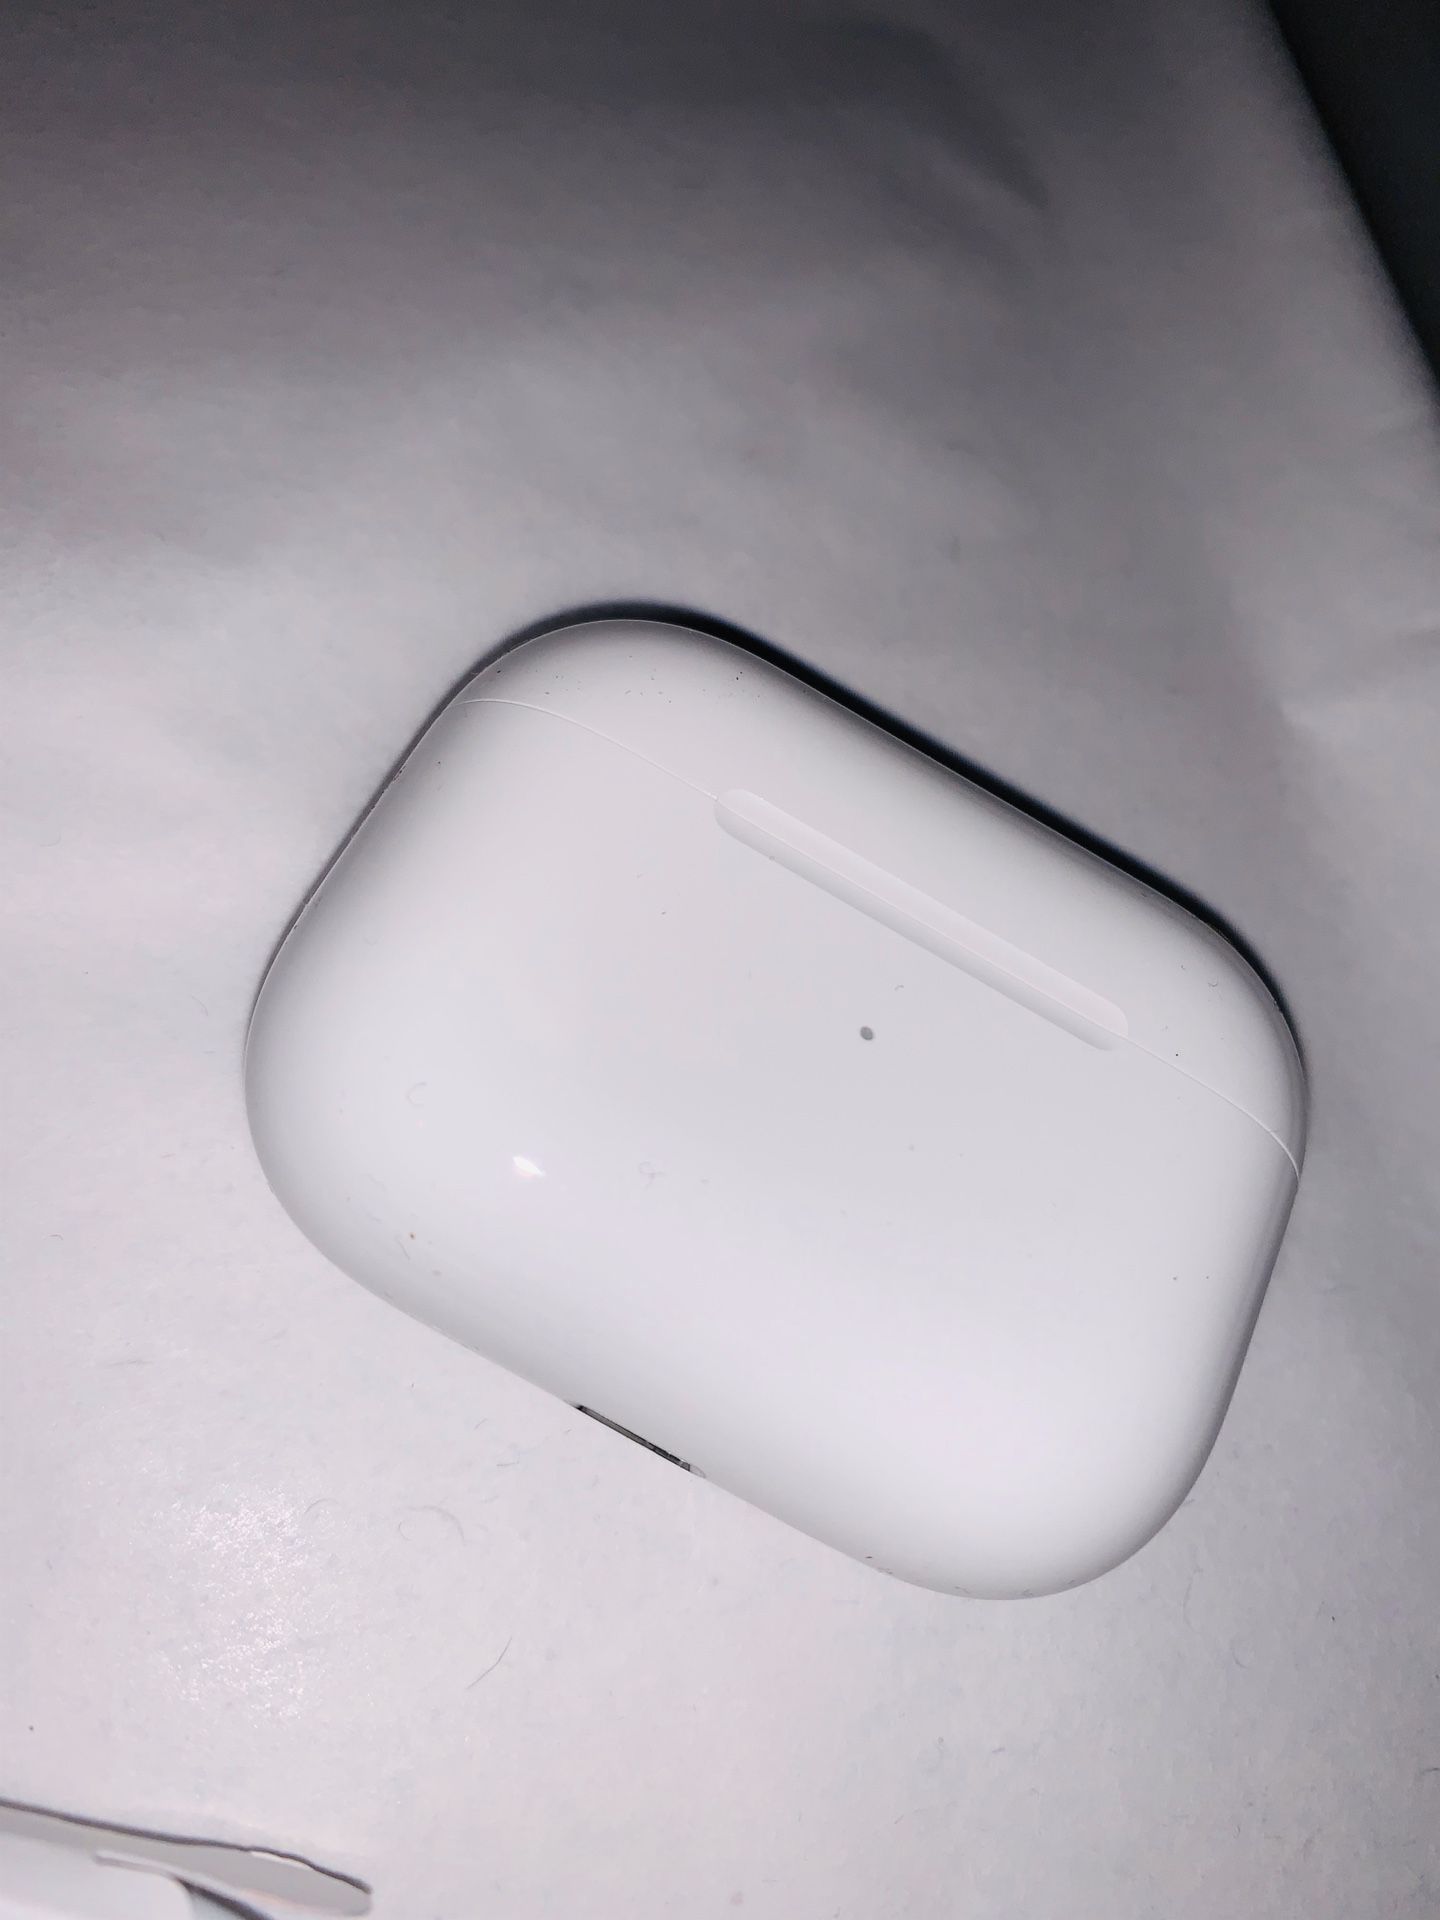 BRAND NEW APPLE AIRPODS PRO